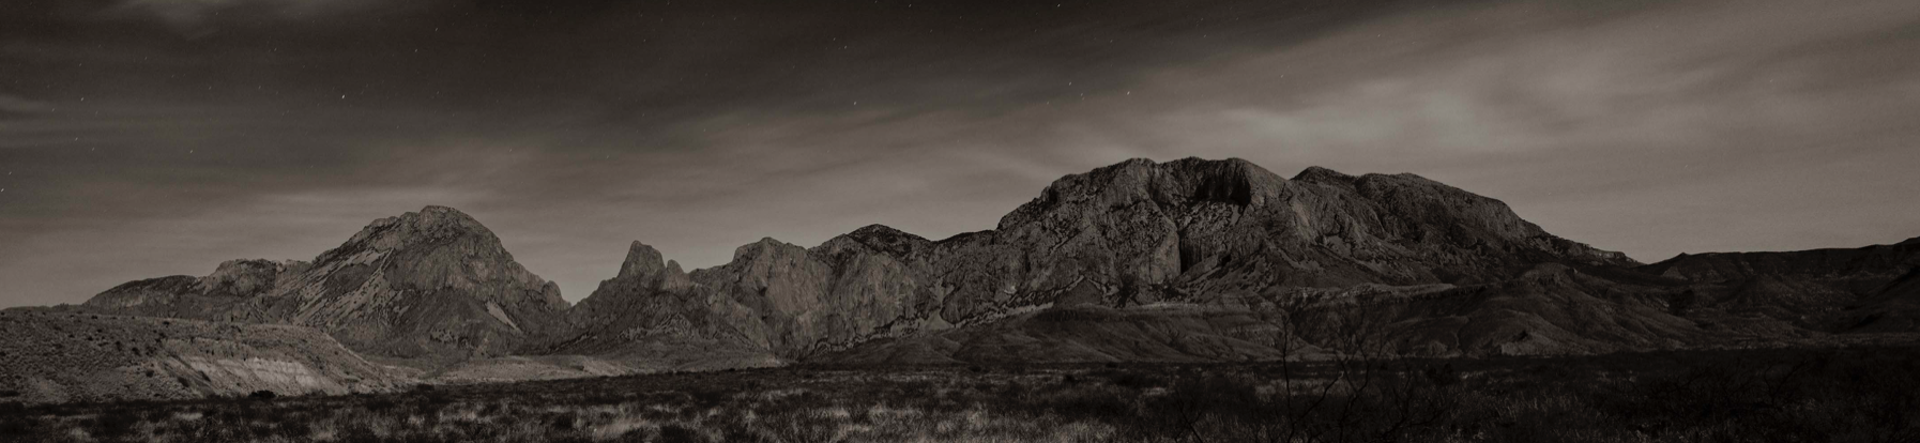 Chisos at Night Panoramic by James H. Evans